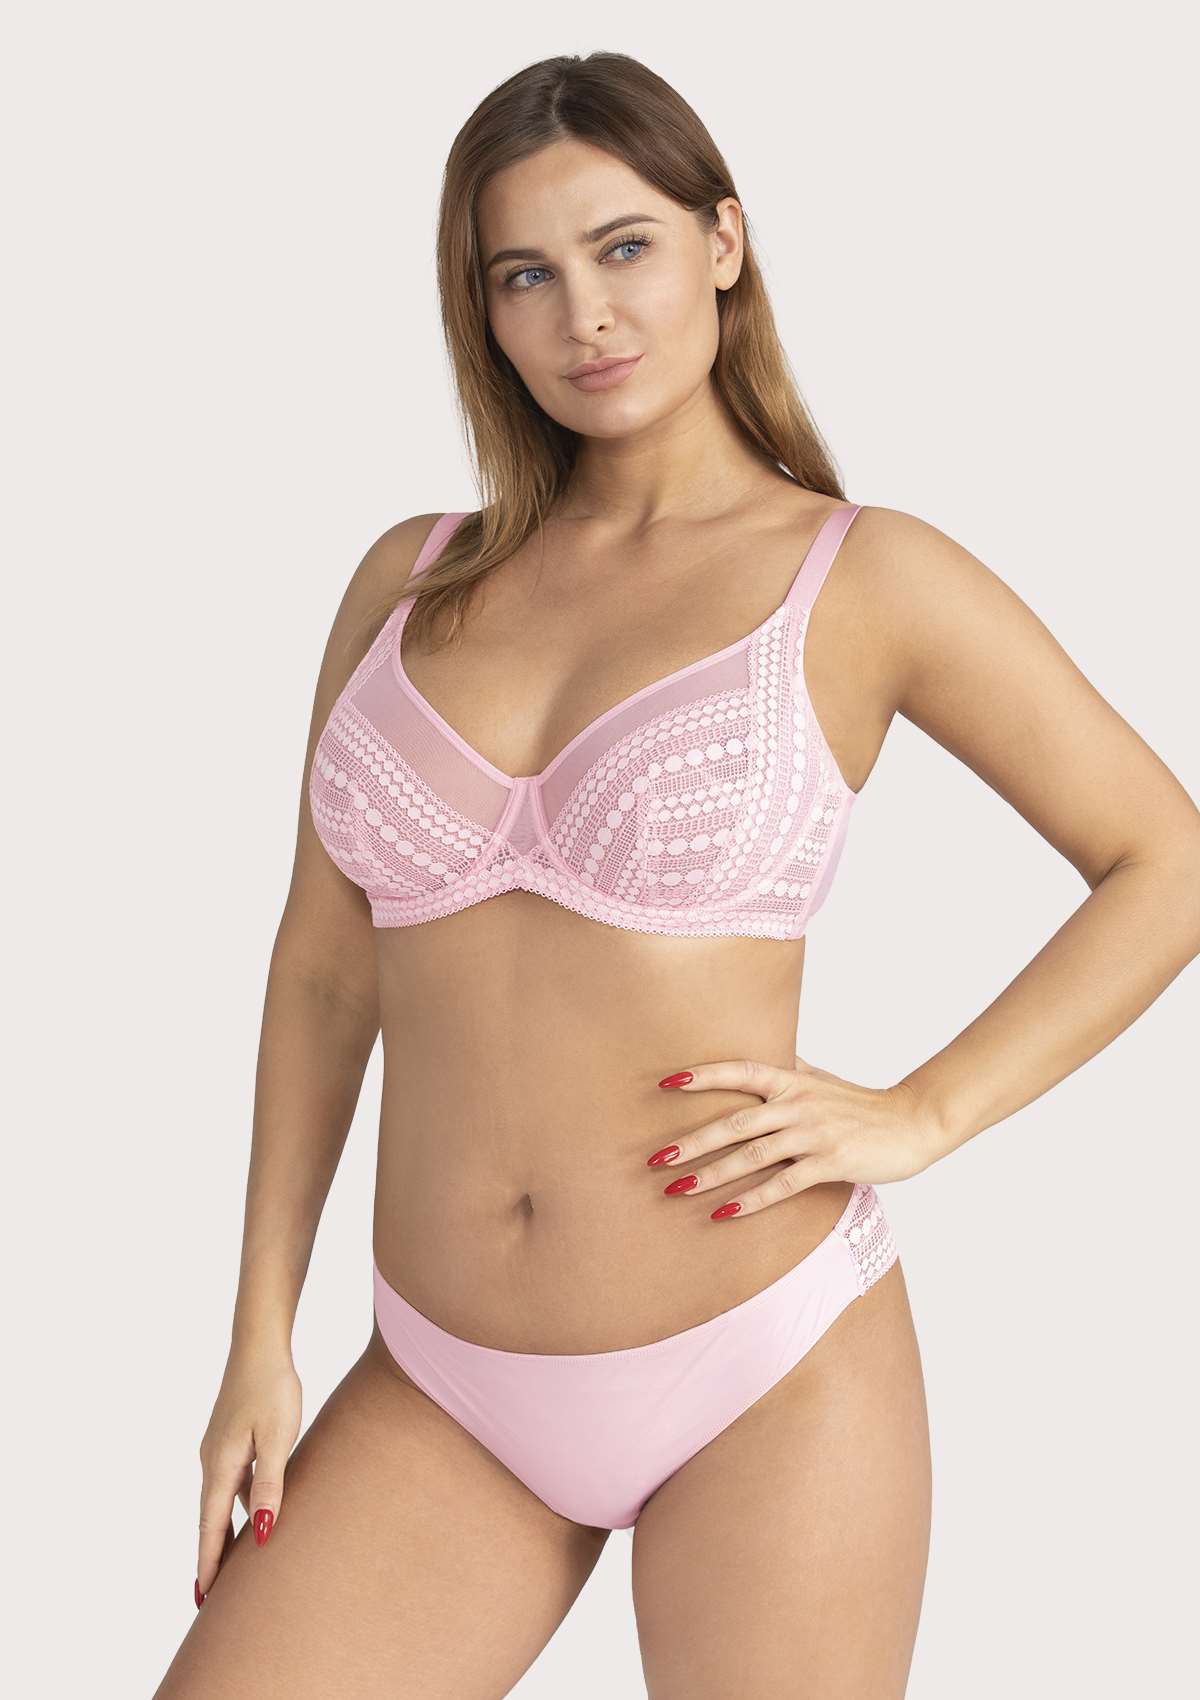 HSIA Heroine Lace Bra And Panties Set: Most Comfortable Supportive Bra - Pink / 40 / C